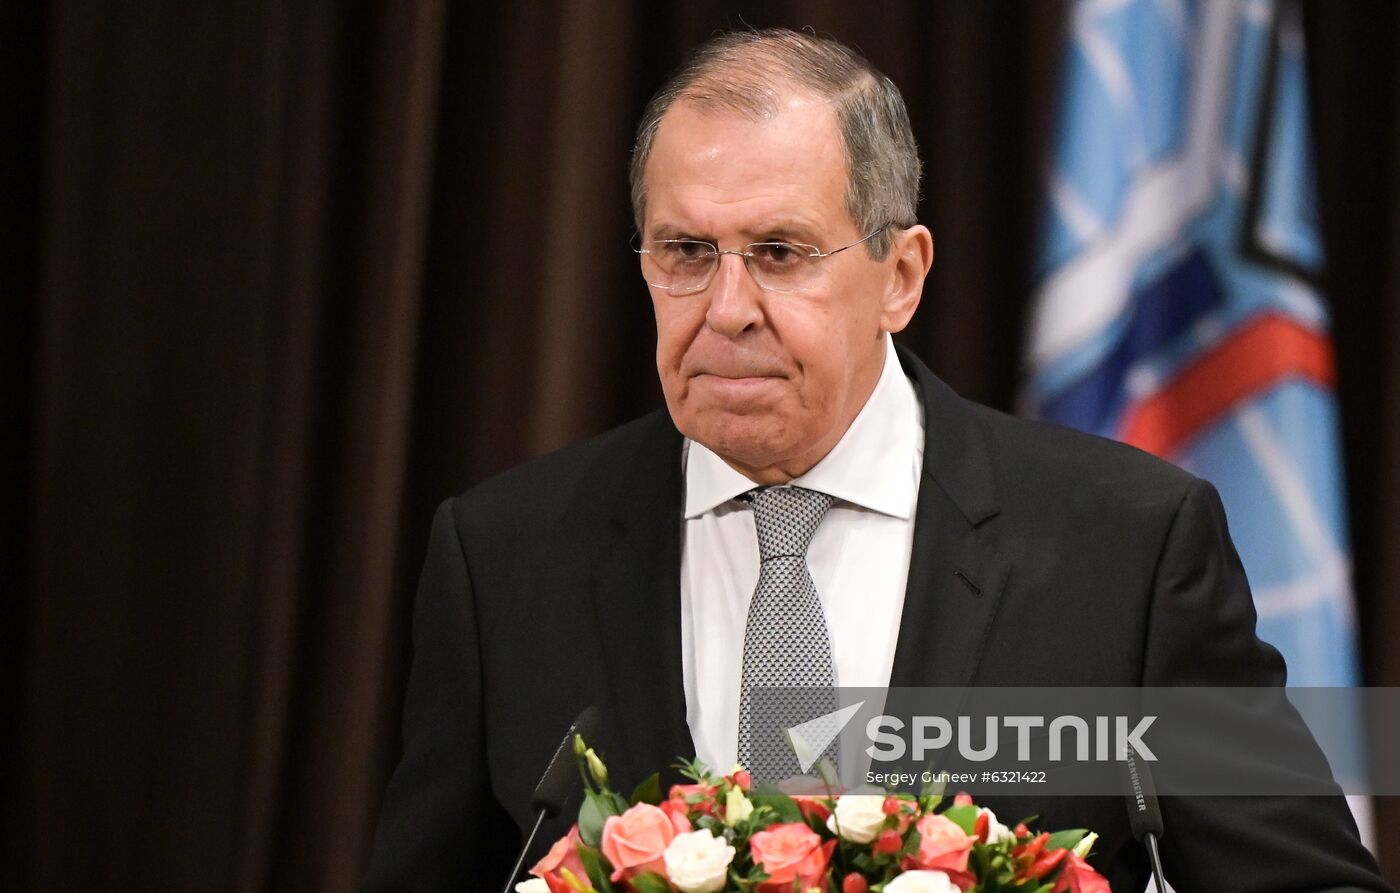 Russia Foreign Minister Academic Year